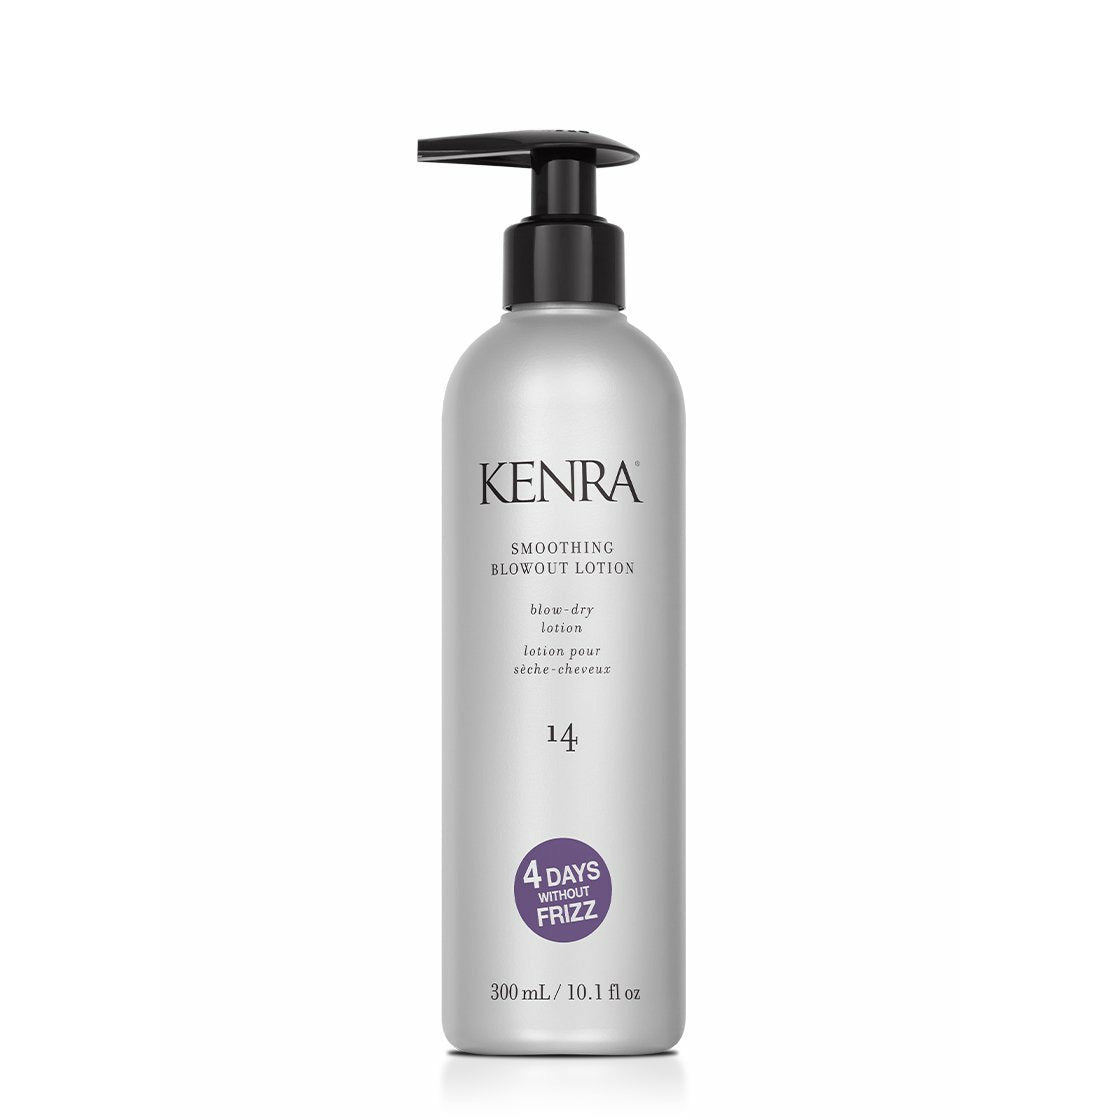 Kenra Smoothing Blowout Lotion